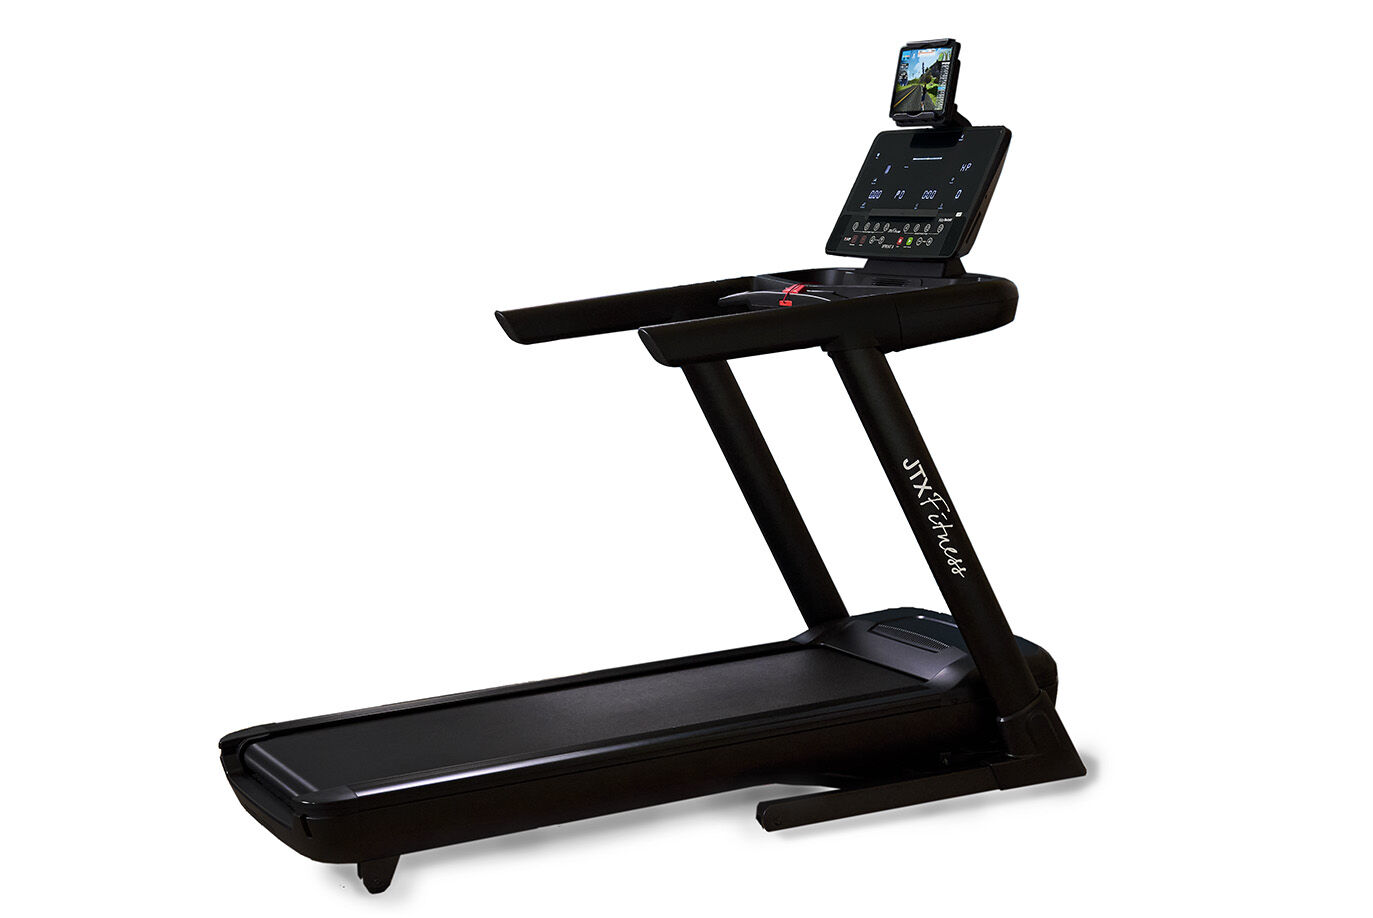 JTX Sprint-8 Pro Smart Treadmill with interactive features